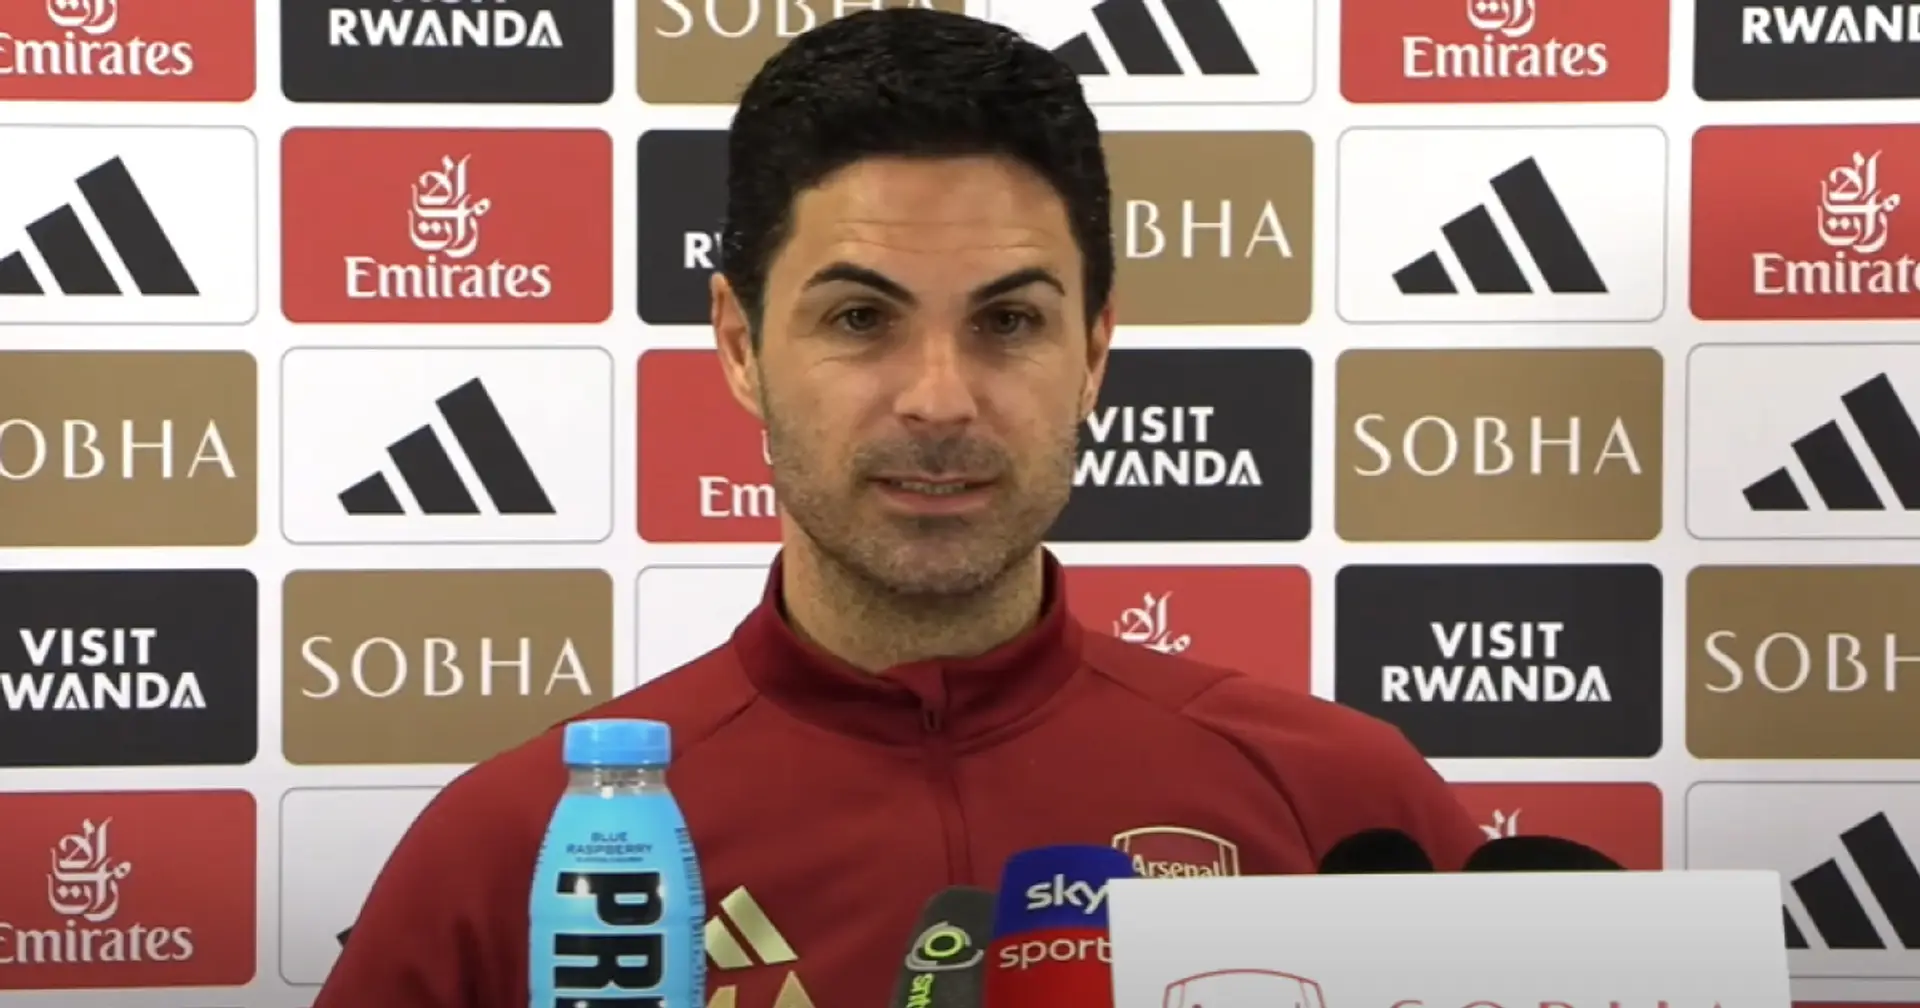 'I was really impressed': Mikel Arteta praises one player after Luton win